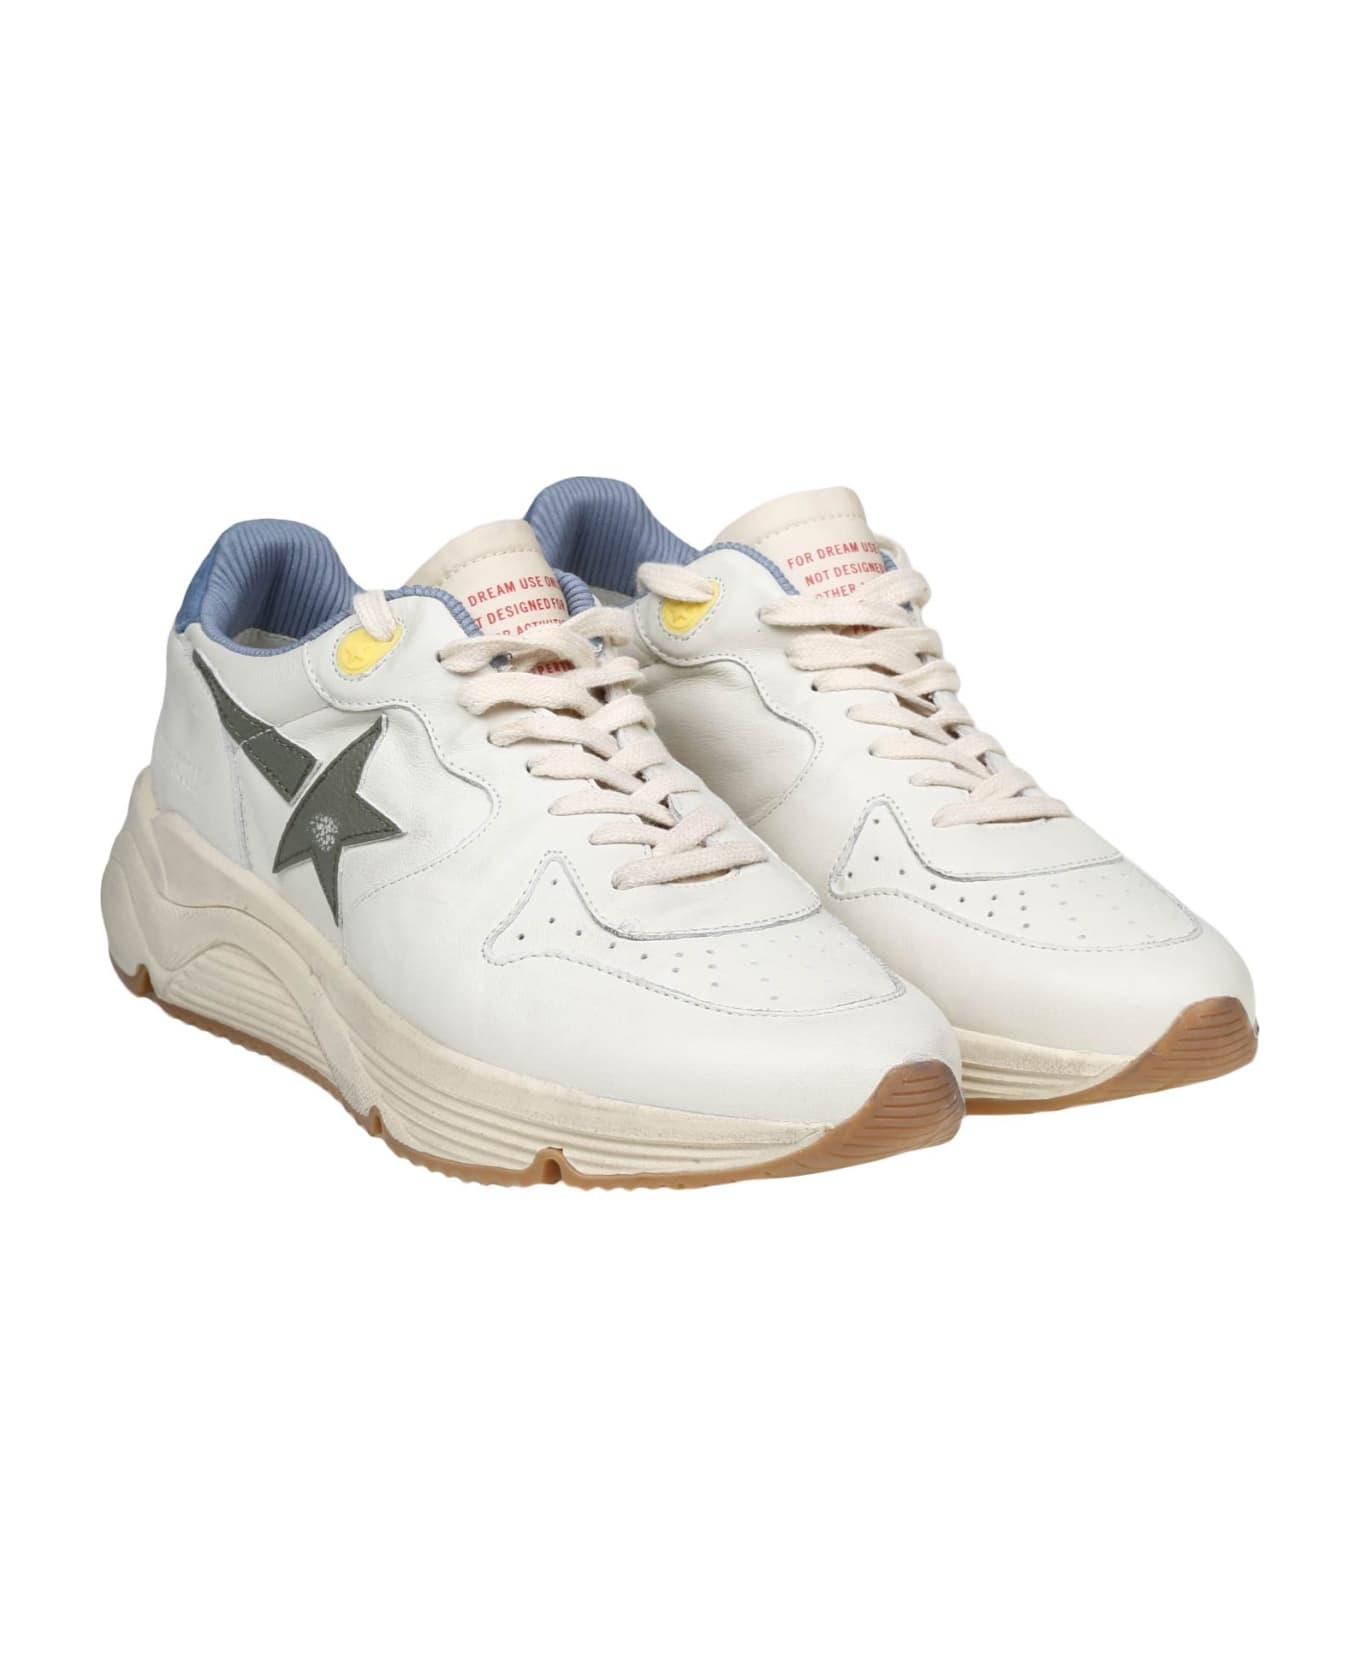 Golden Goose Running Sole Padded Sneakers - White/Green/Powder Blue